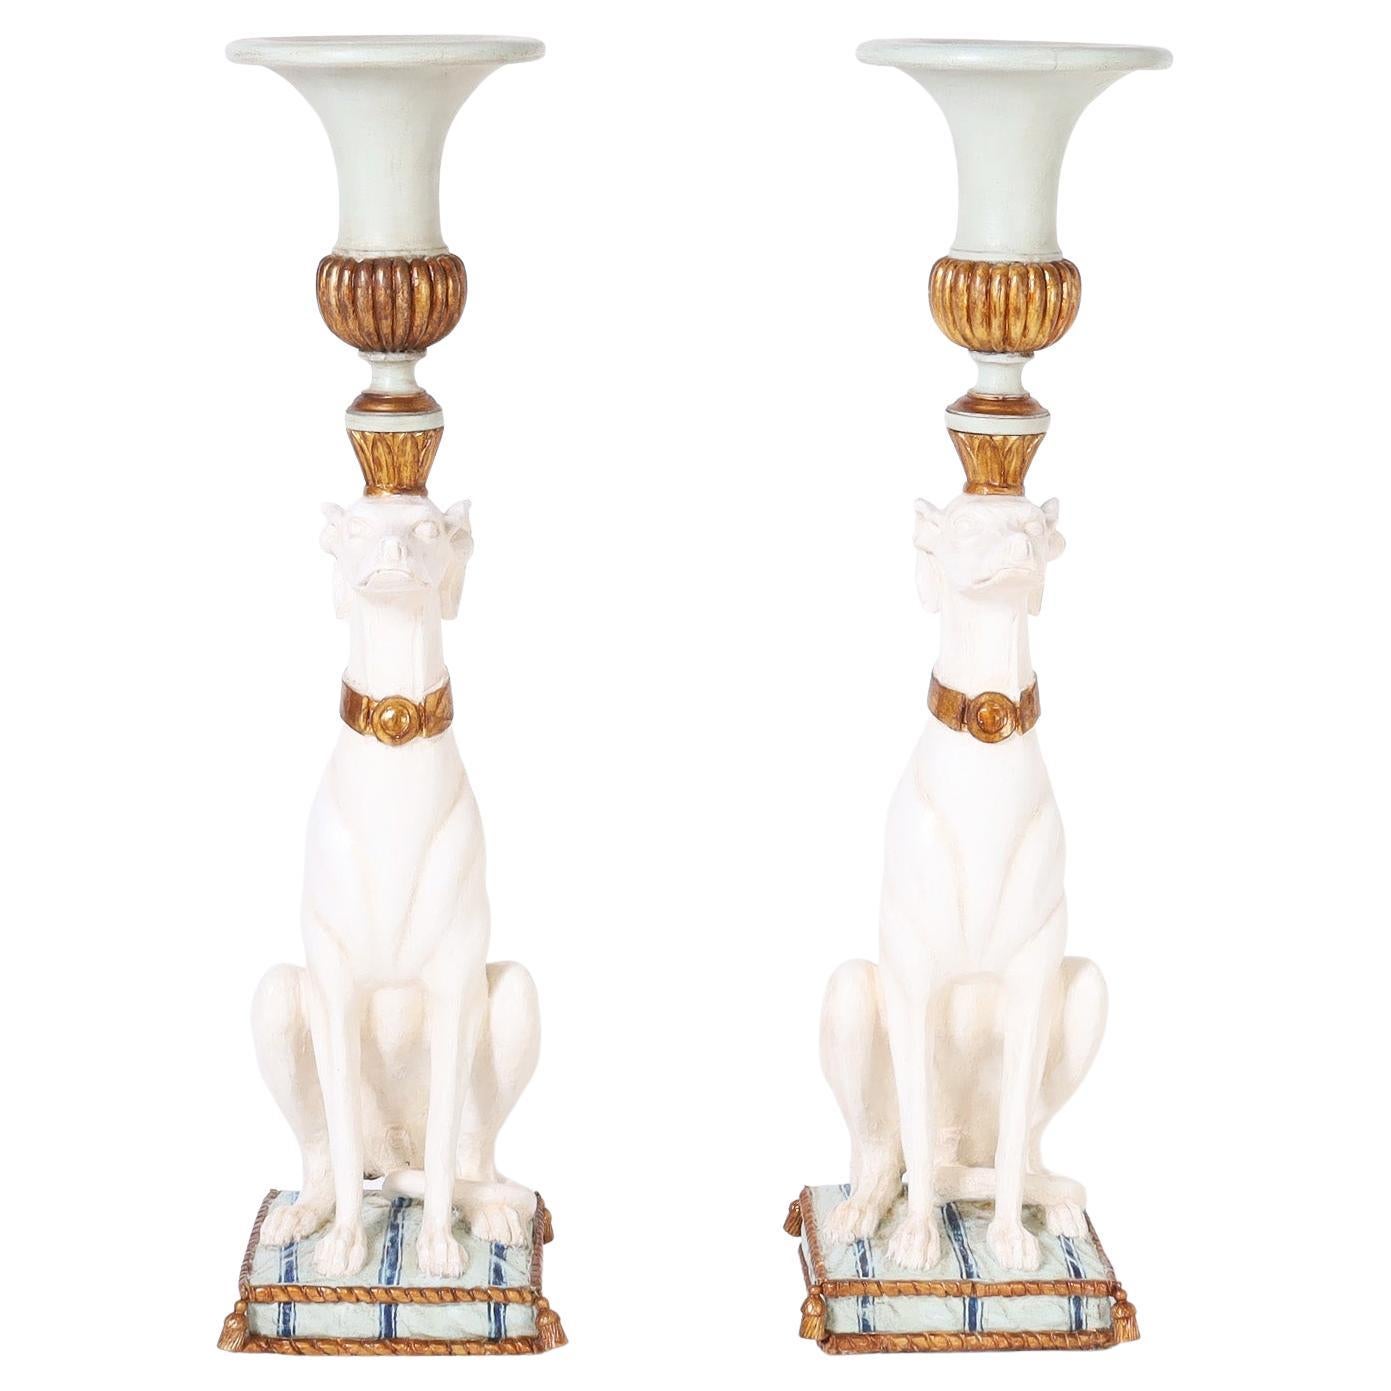 Handsome pair of antique Italian whippets or dogs carved from hardwood paint decorated and parcel gilt depicting the pair seated on pillows while balancing urns on their heads.